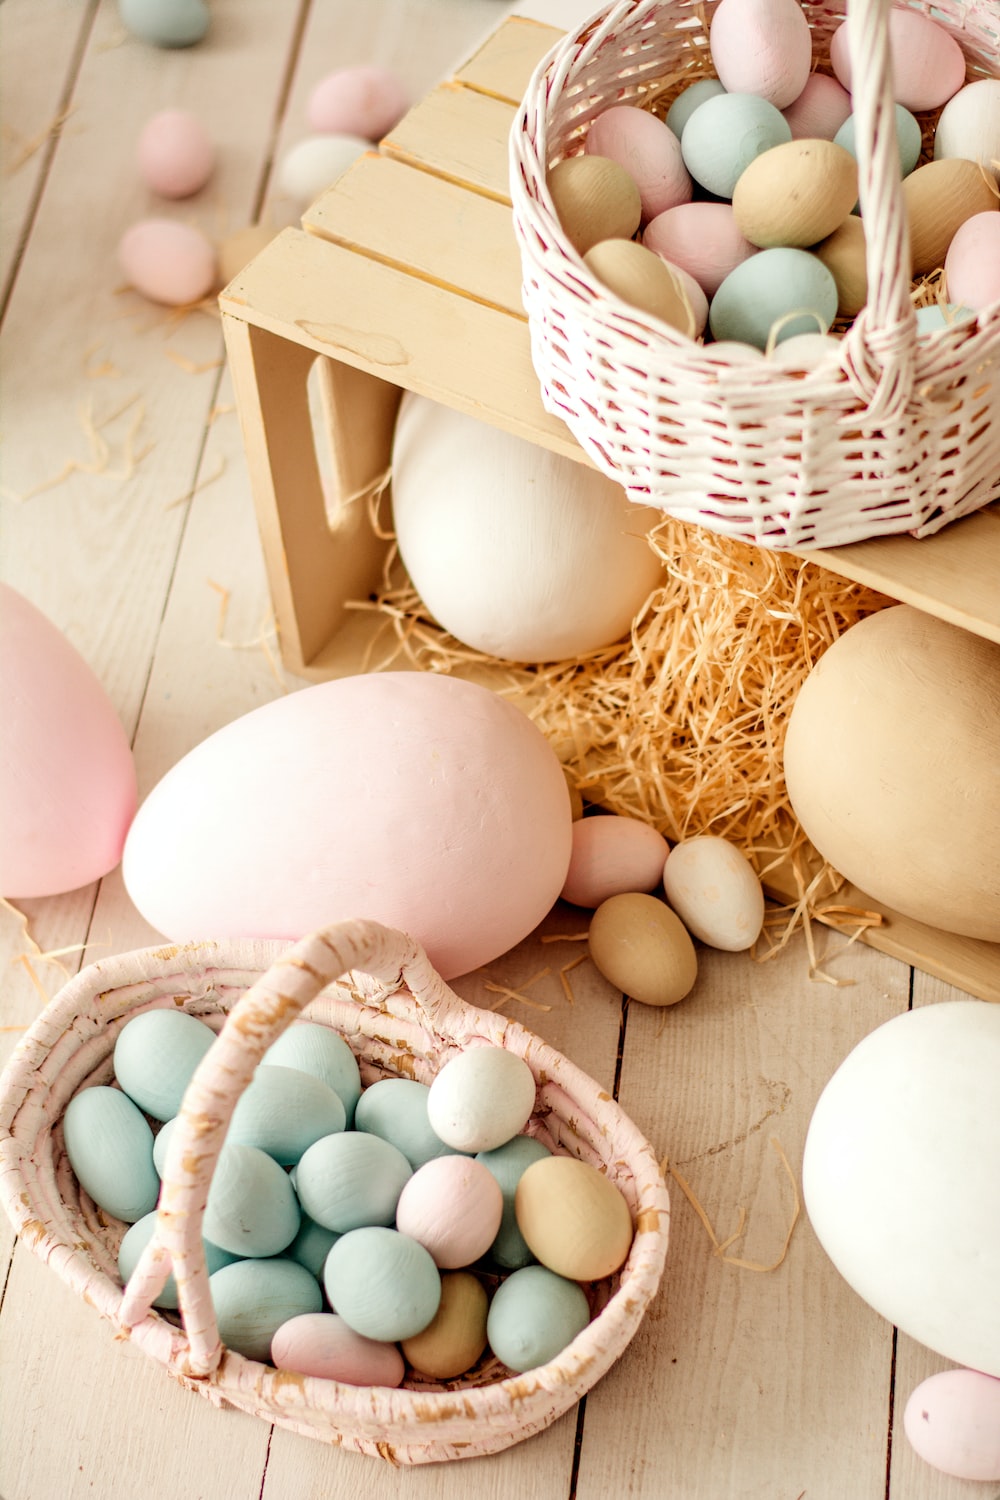 Easter Basket Picture. Download Free Image